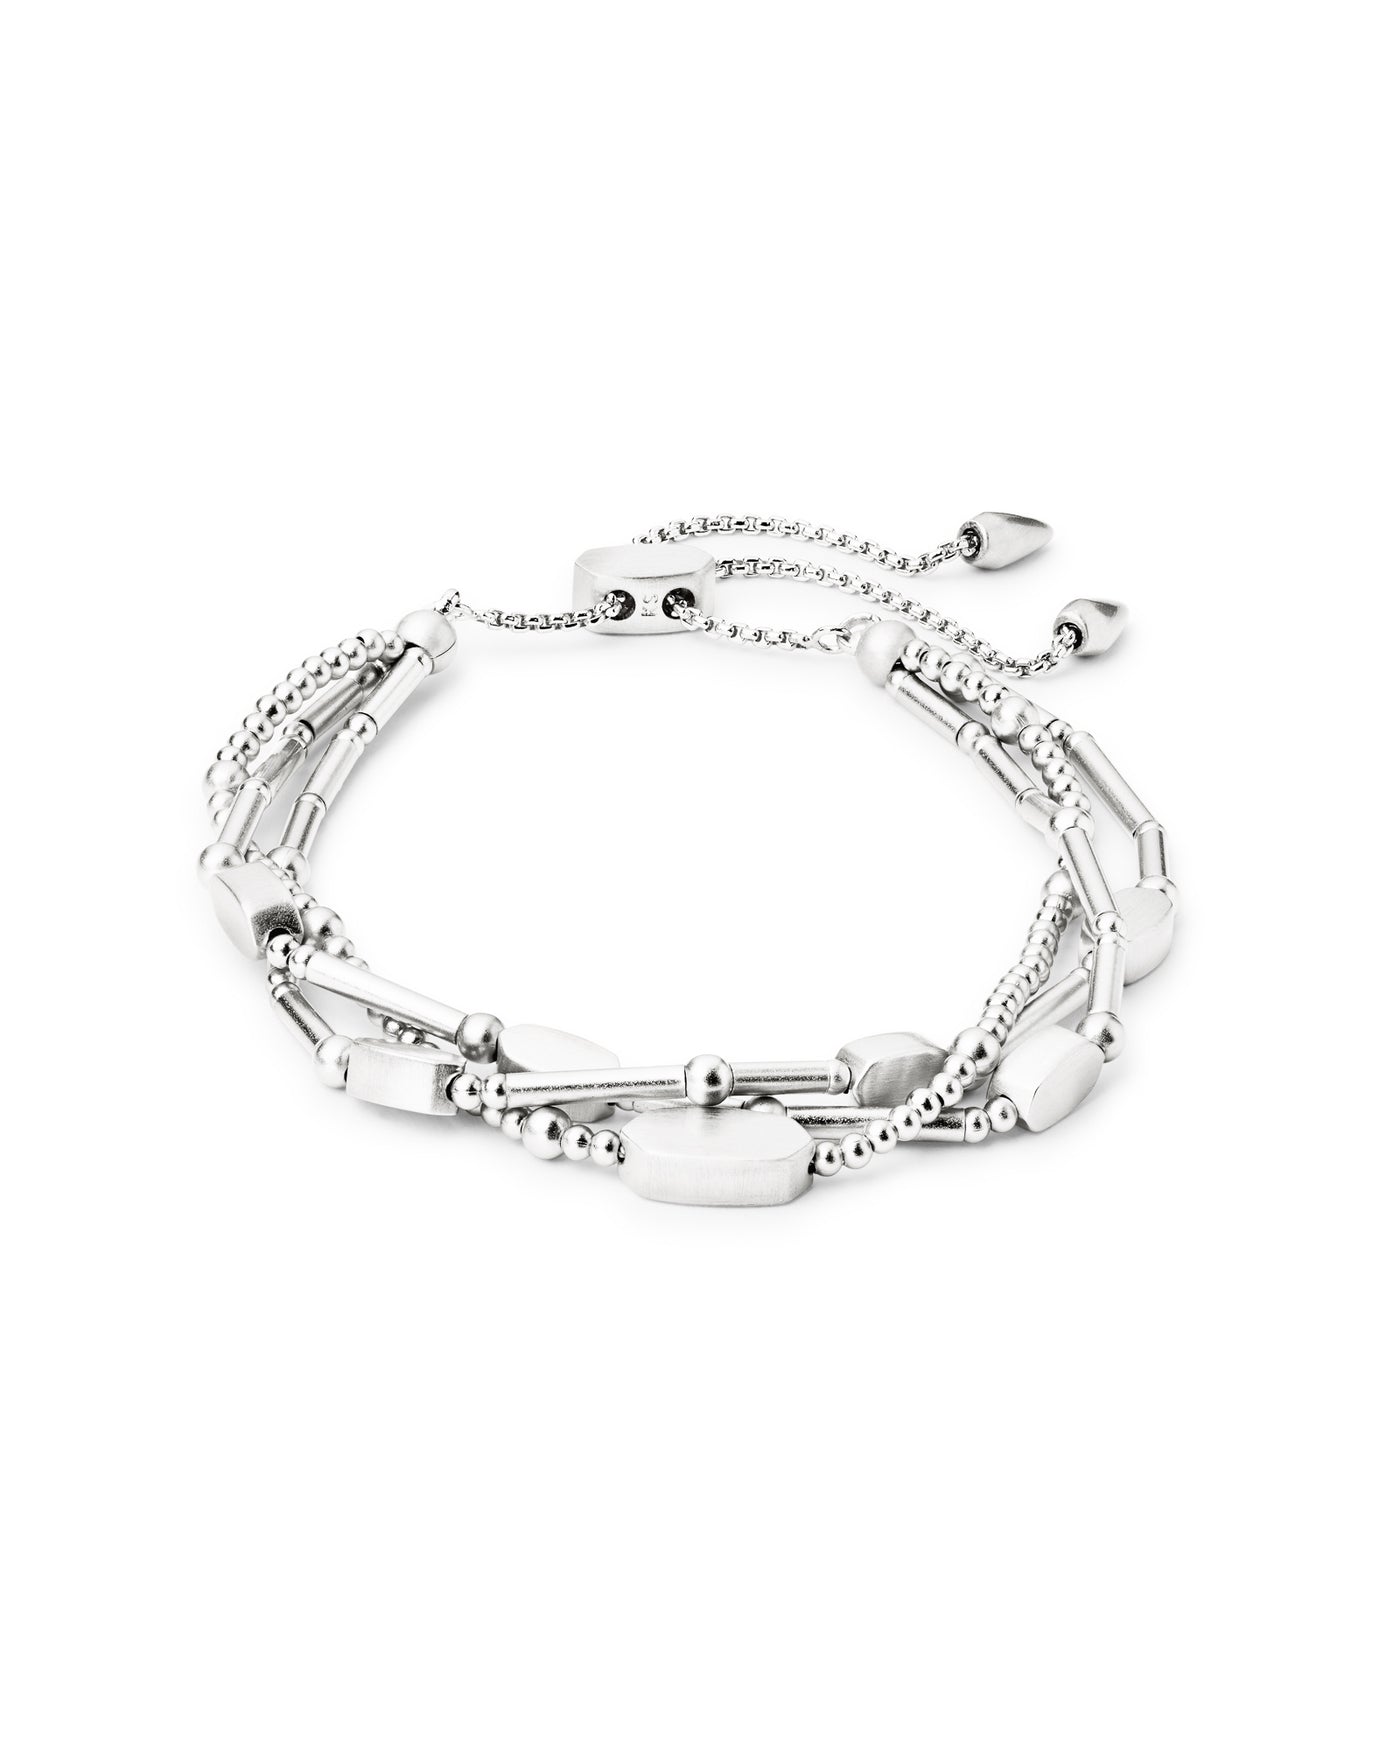 Kendra Scott Chantal Bracelet Bright Silver Metal-Bracelets-Kendra Scott-Market Street Nest, Fashionable Clothing, Shoes and Home Décor Located in Mabank, TX